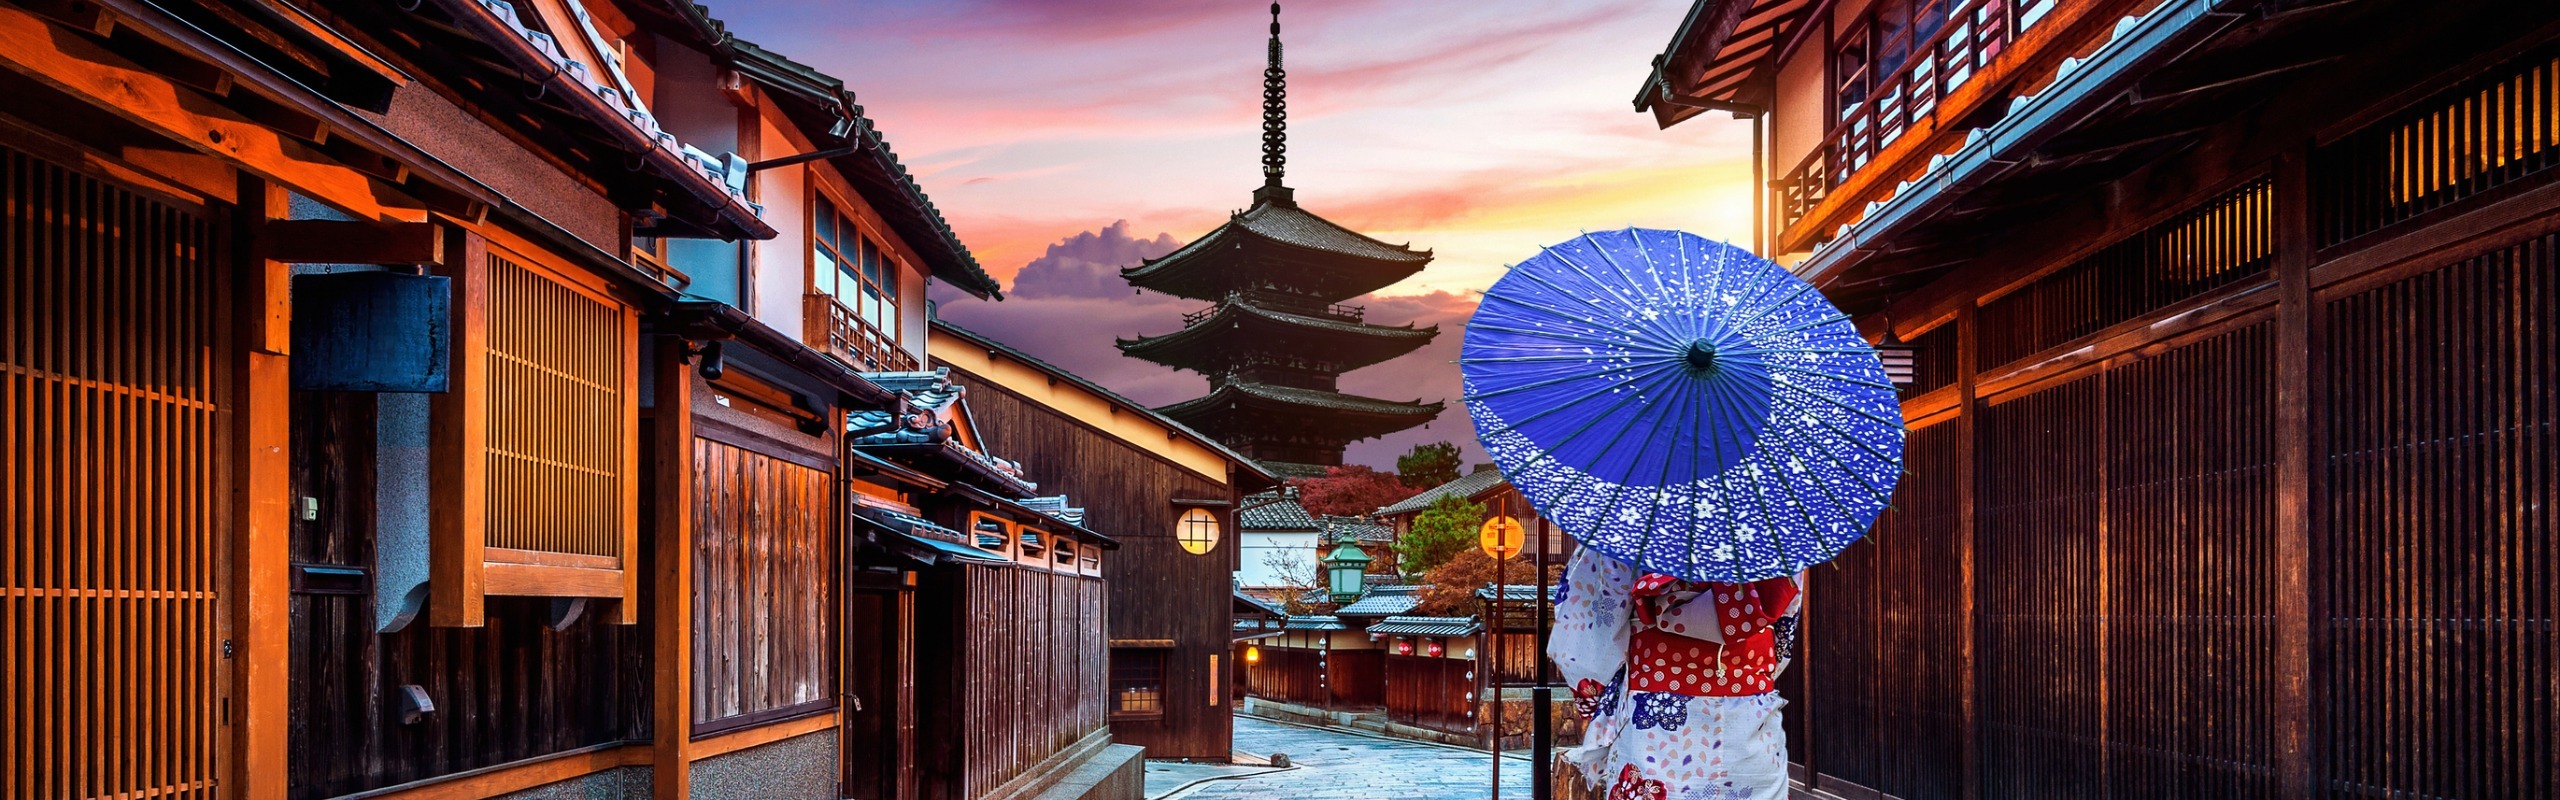 The Top 5 Itineraries for One Week in Japan: Families, Couples, Anime Lovers...